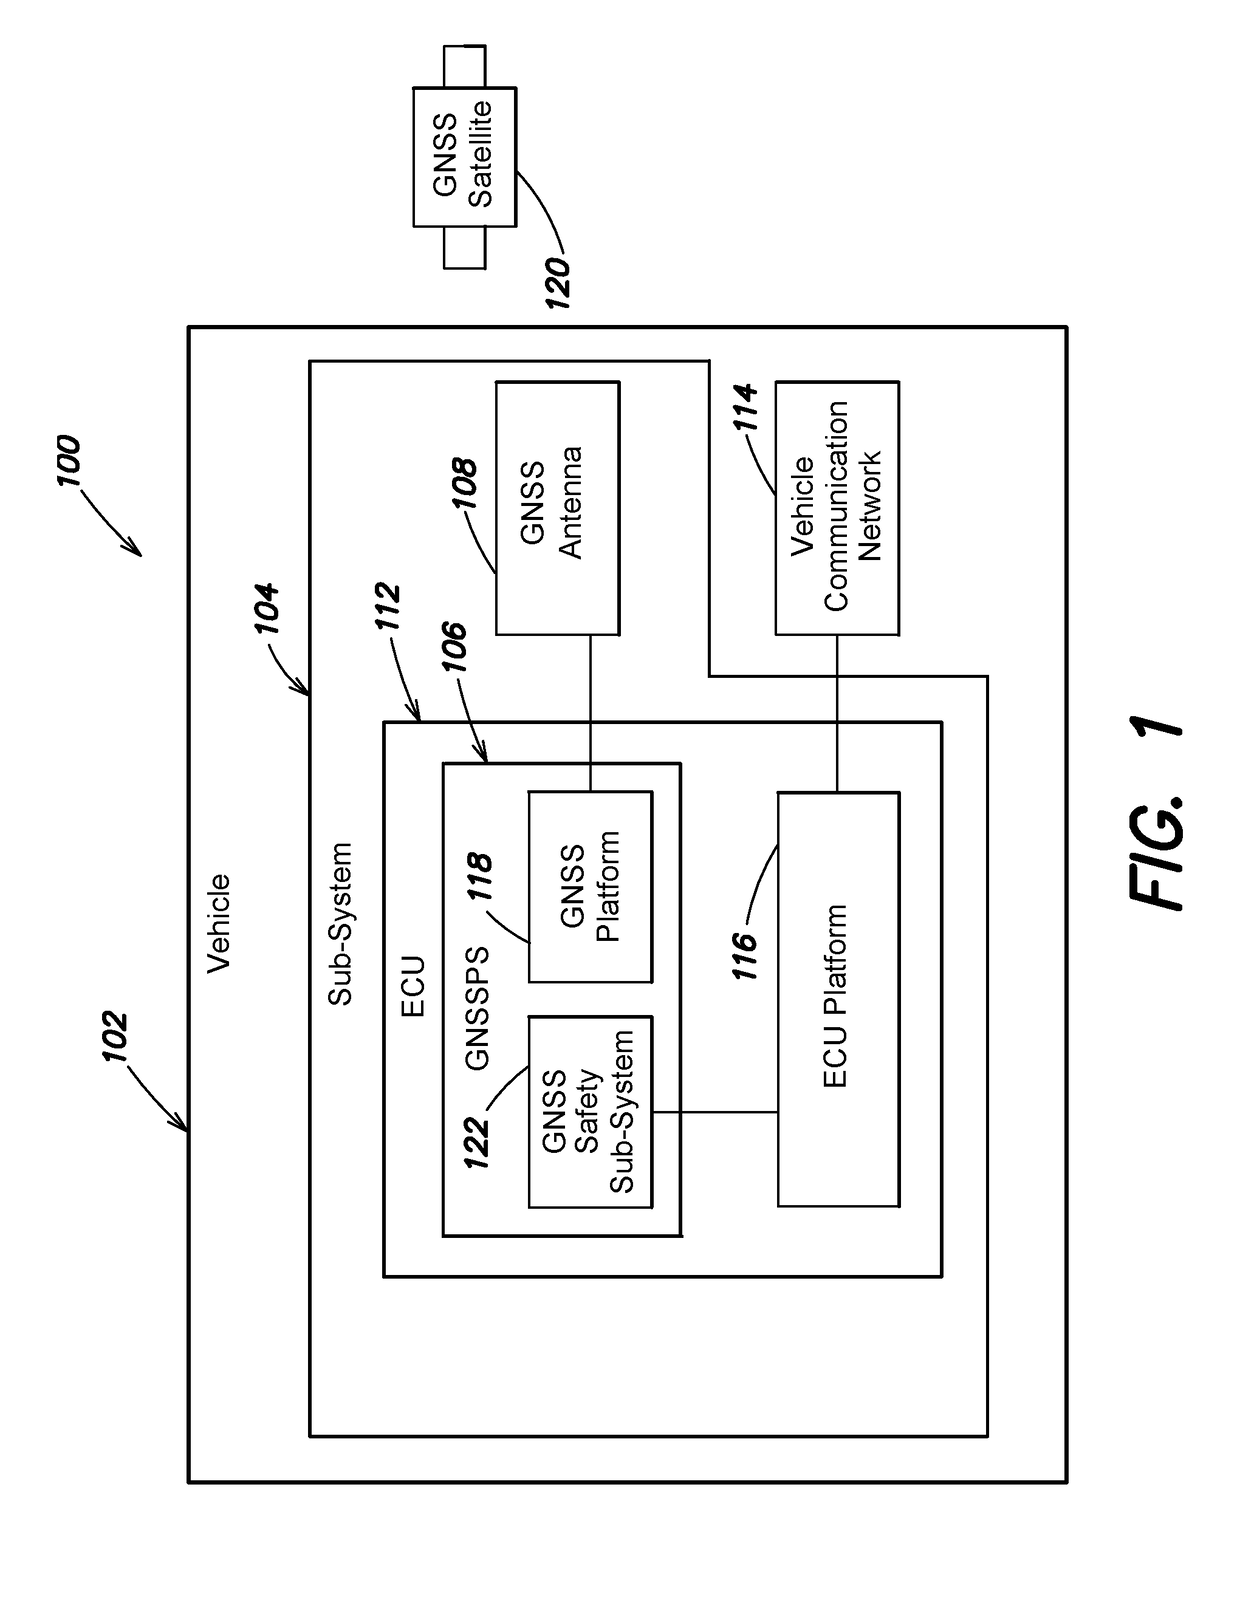 System and method to provide an asil qualifier for GNSS position and related values